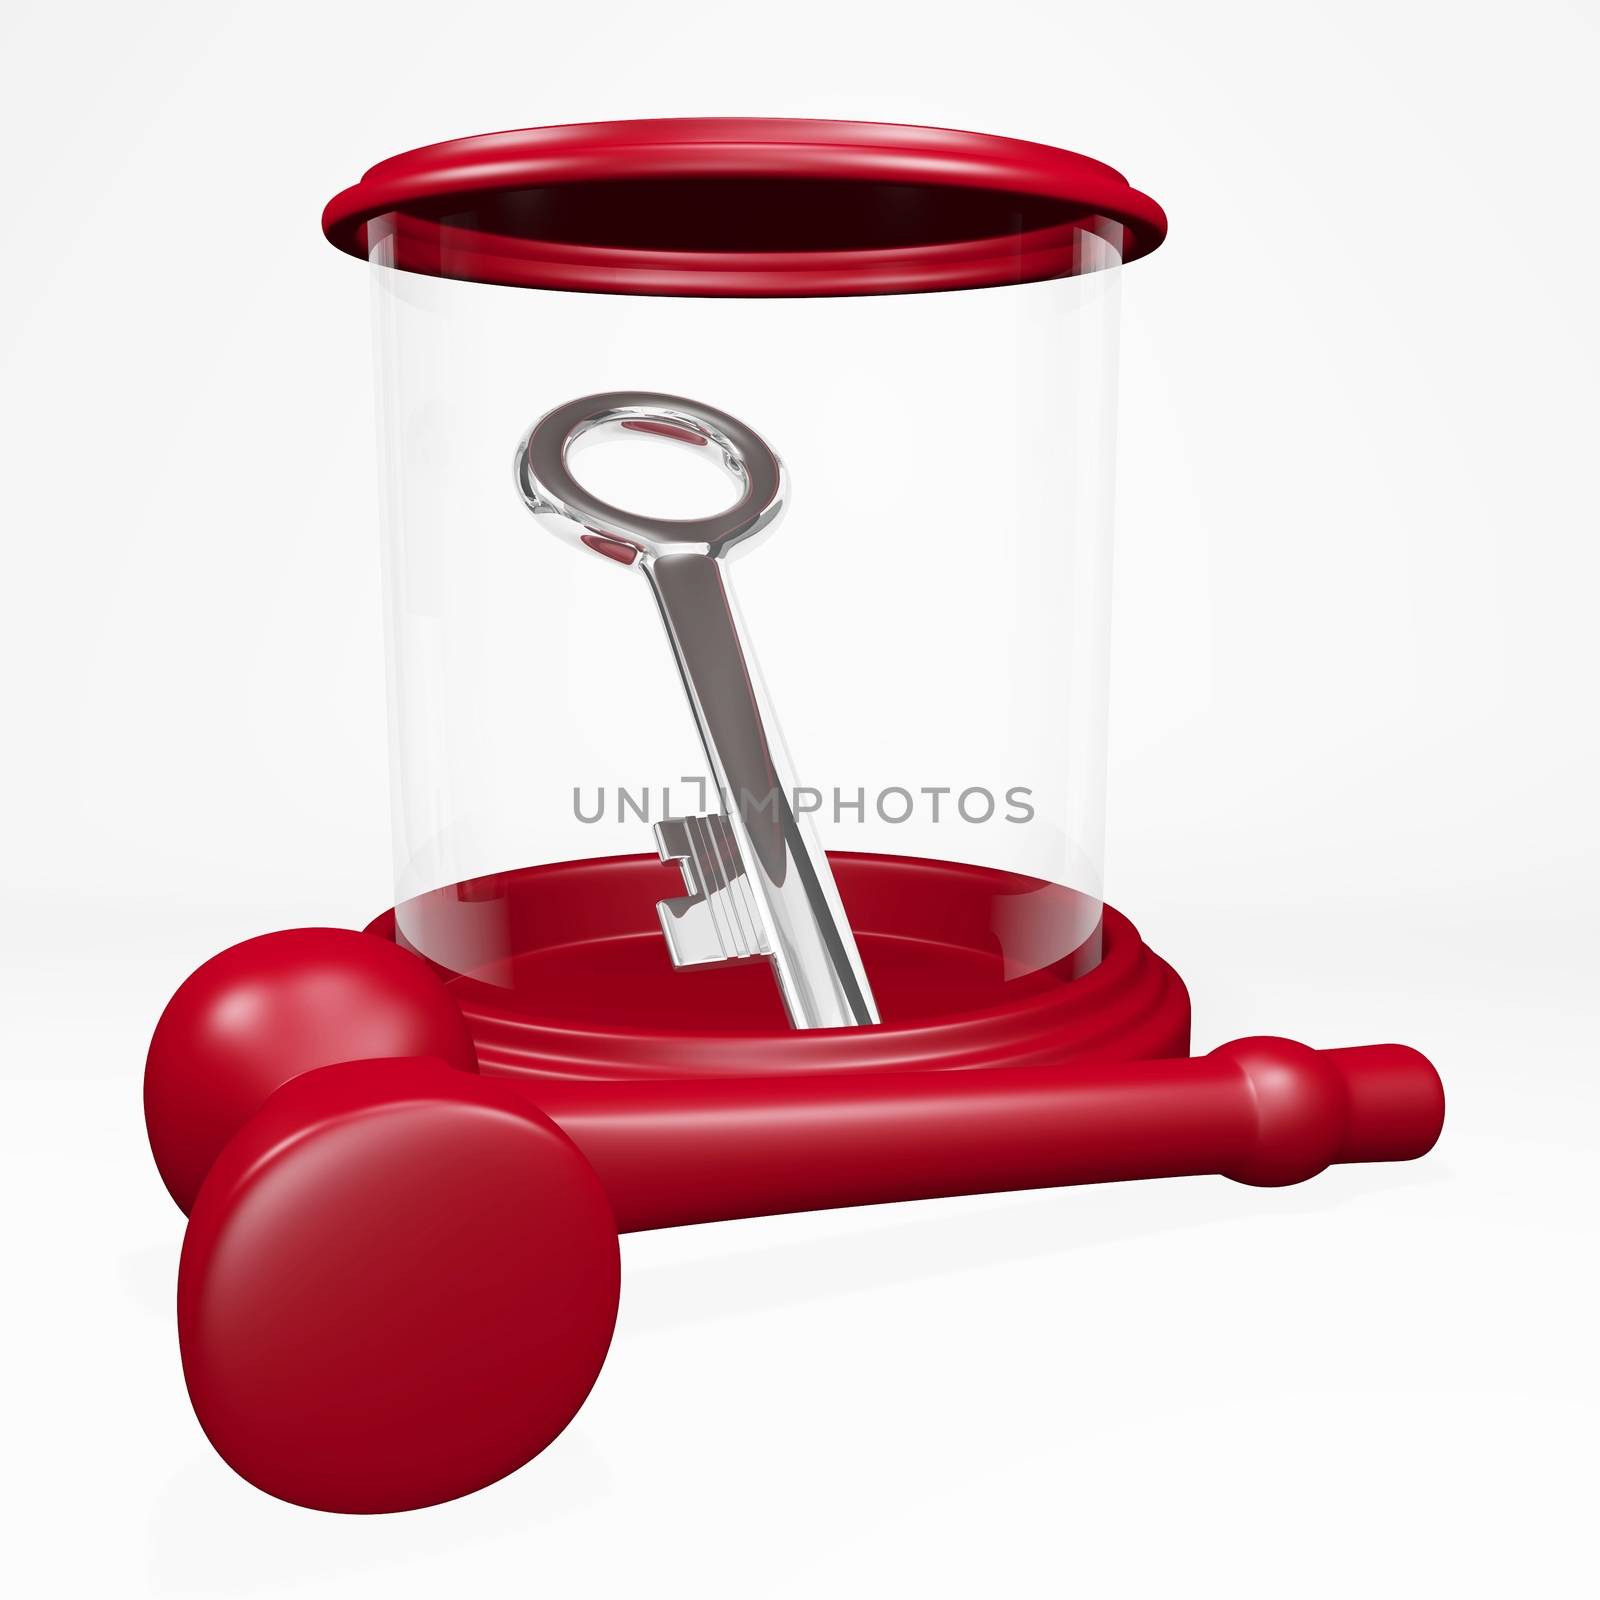 The 3D illustration shows a steel or chrome key placed in a glass display case and a plastic hammer lying along side. This will find use in real estate, conceptual business ideas, security and business solutions related concepts.
